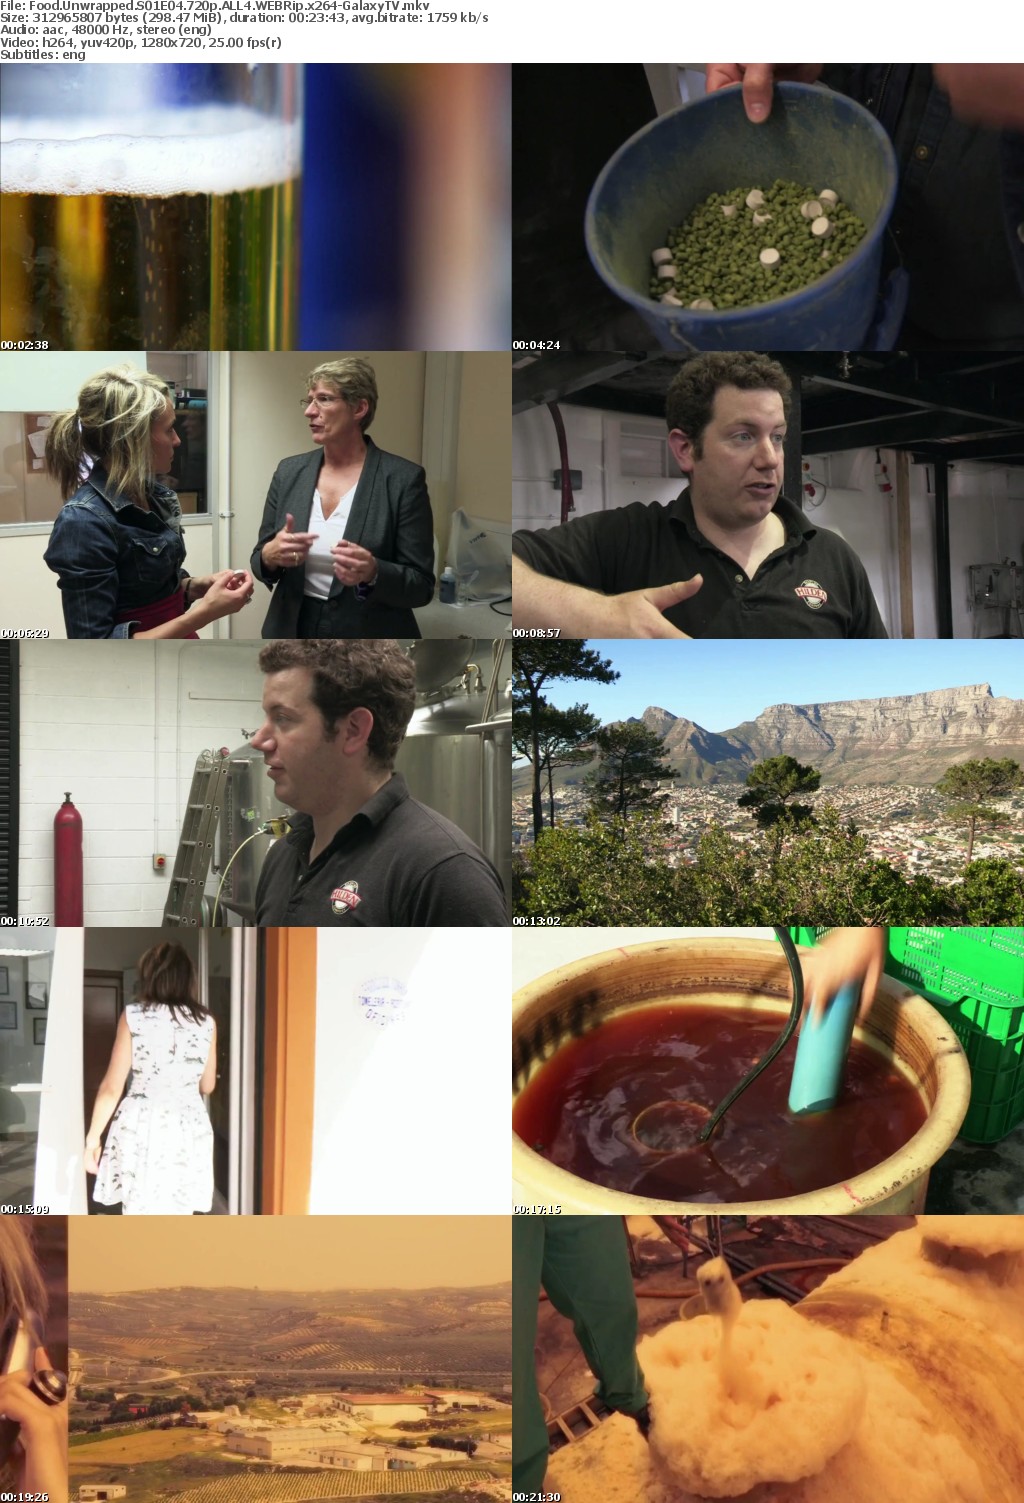 Food Unwrapped S01 COMPLETE 720p ALL4 WEBRip x264-GalaxyTV